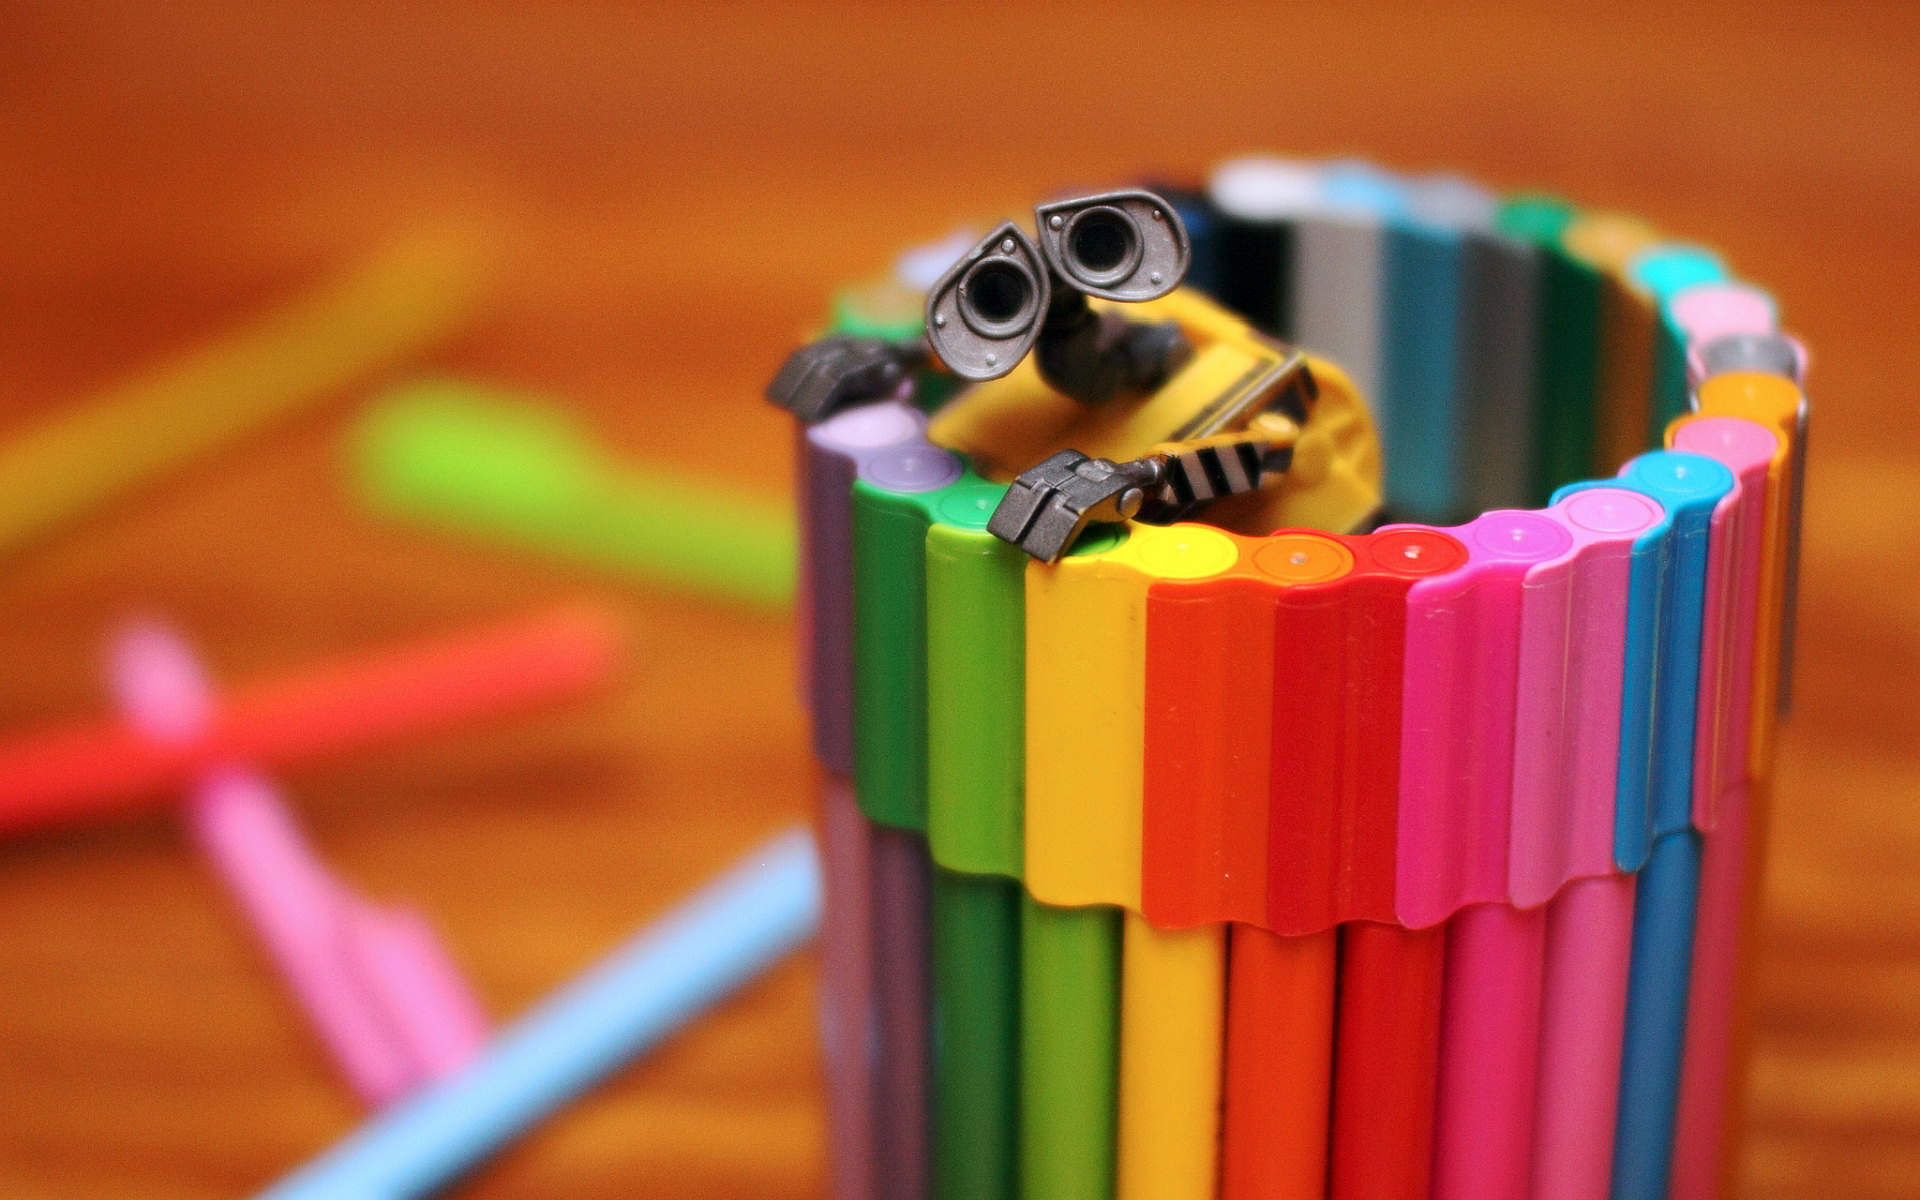 Walle toy crayons